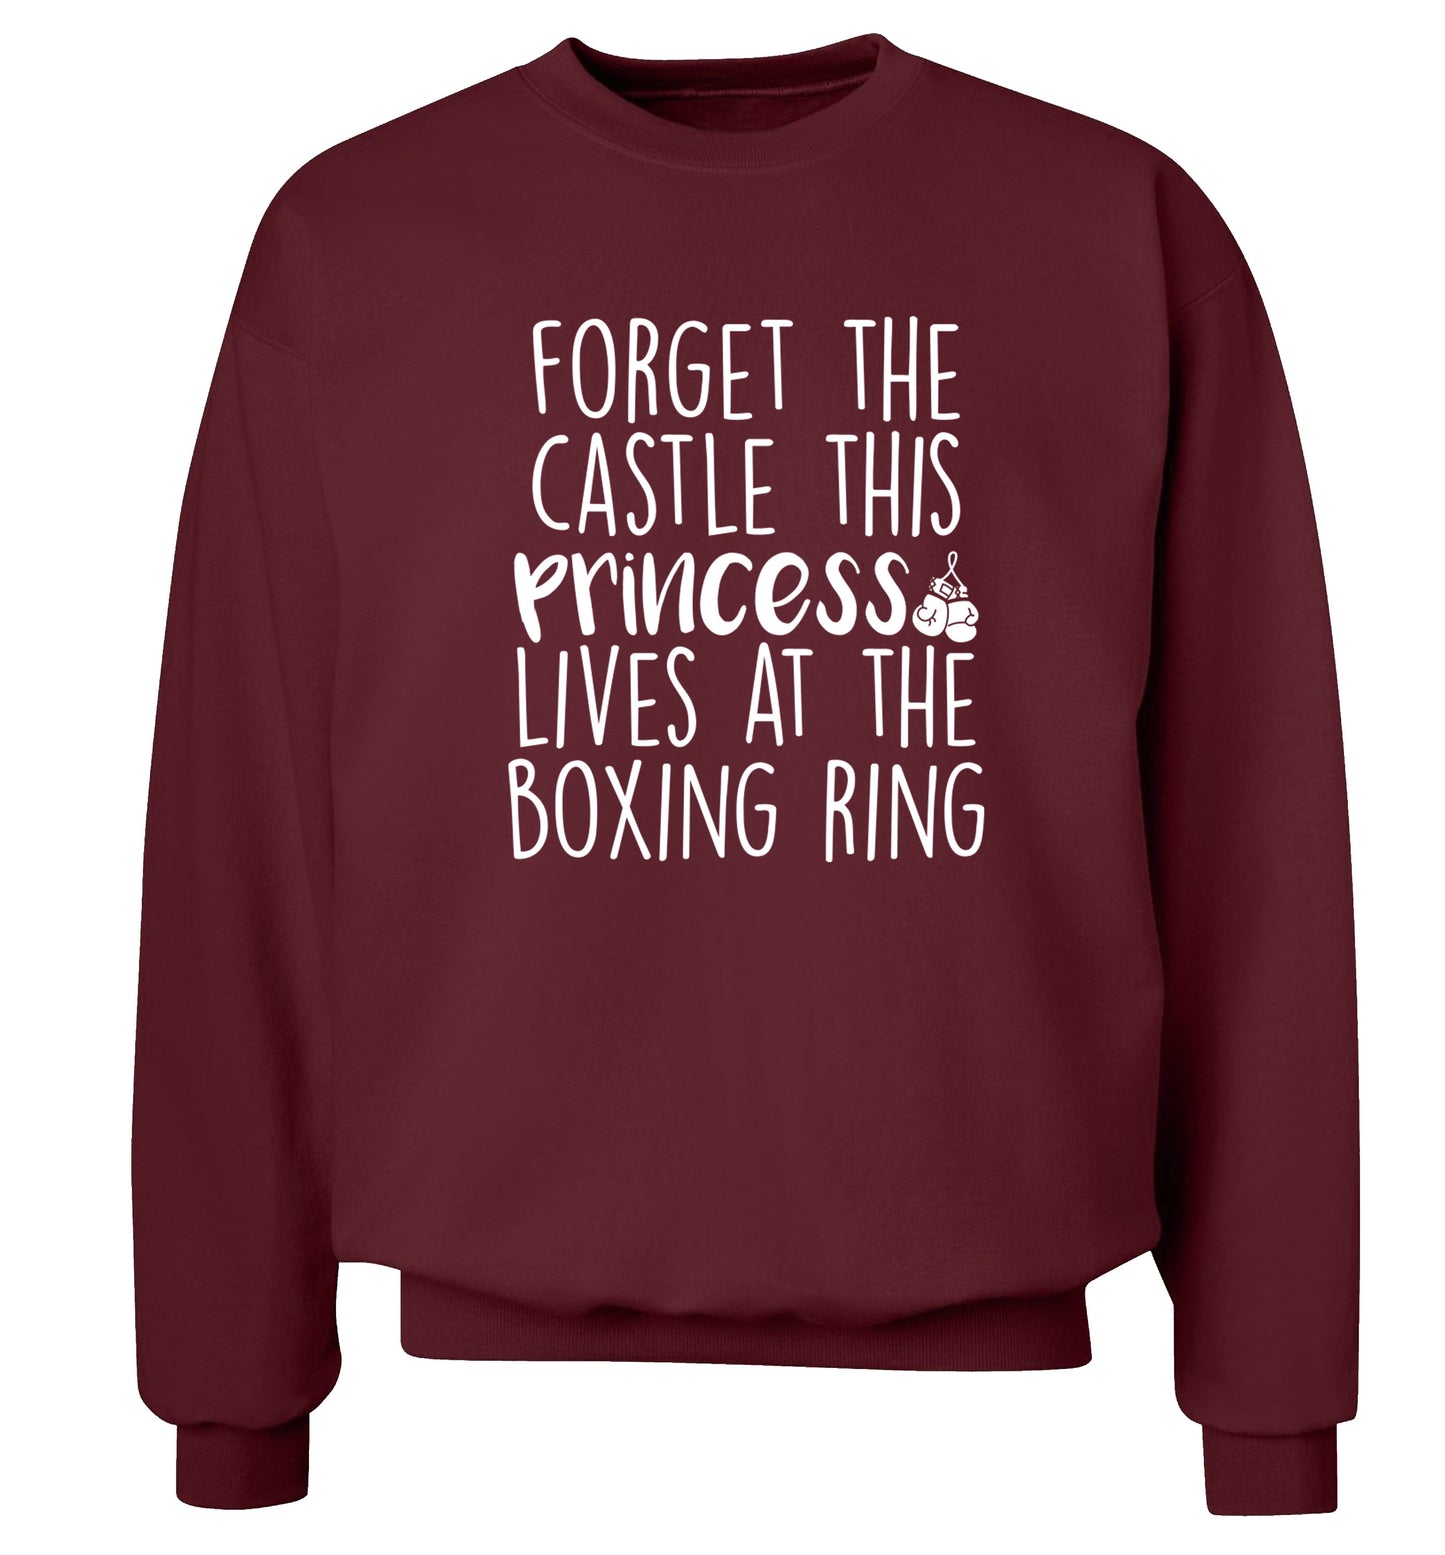 Forget the castle this princess lives at the boxing ring Adult's unisex maroon Sweater 2XL